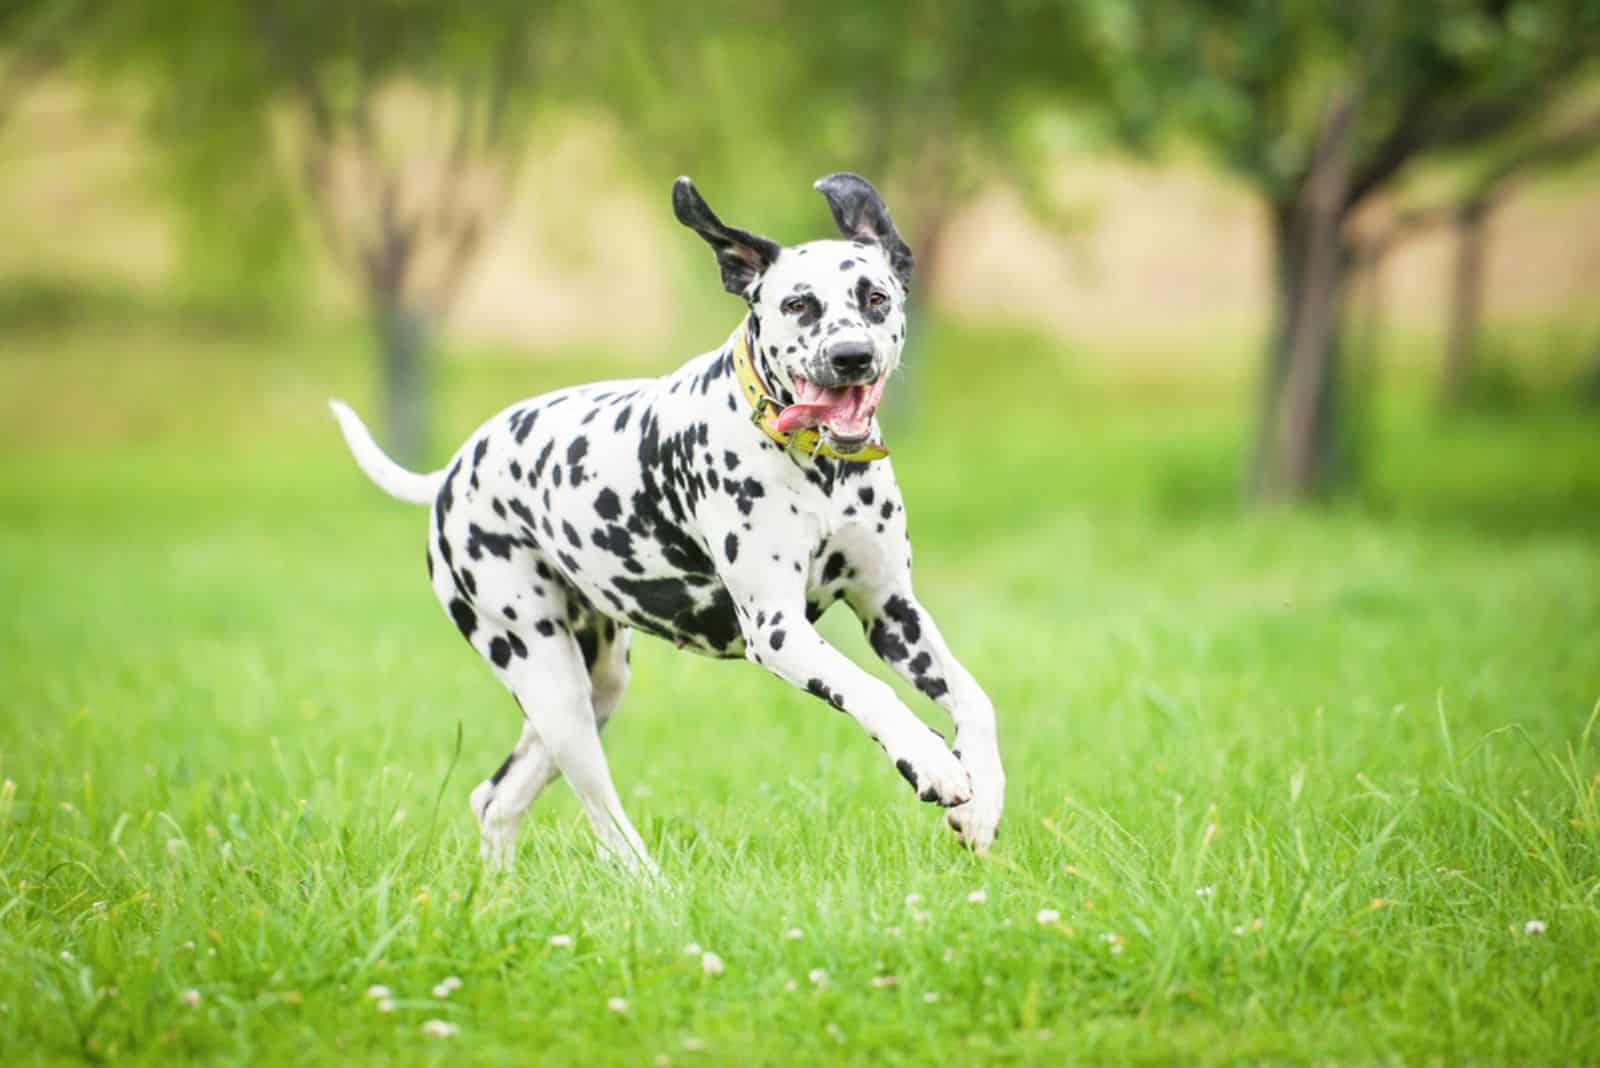 The 10 Fastest Dog Breeds On The Planet, With An Odd One Out